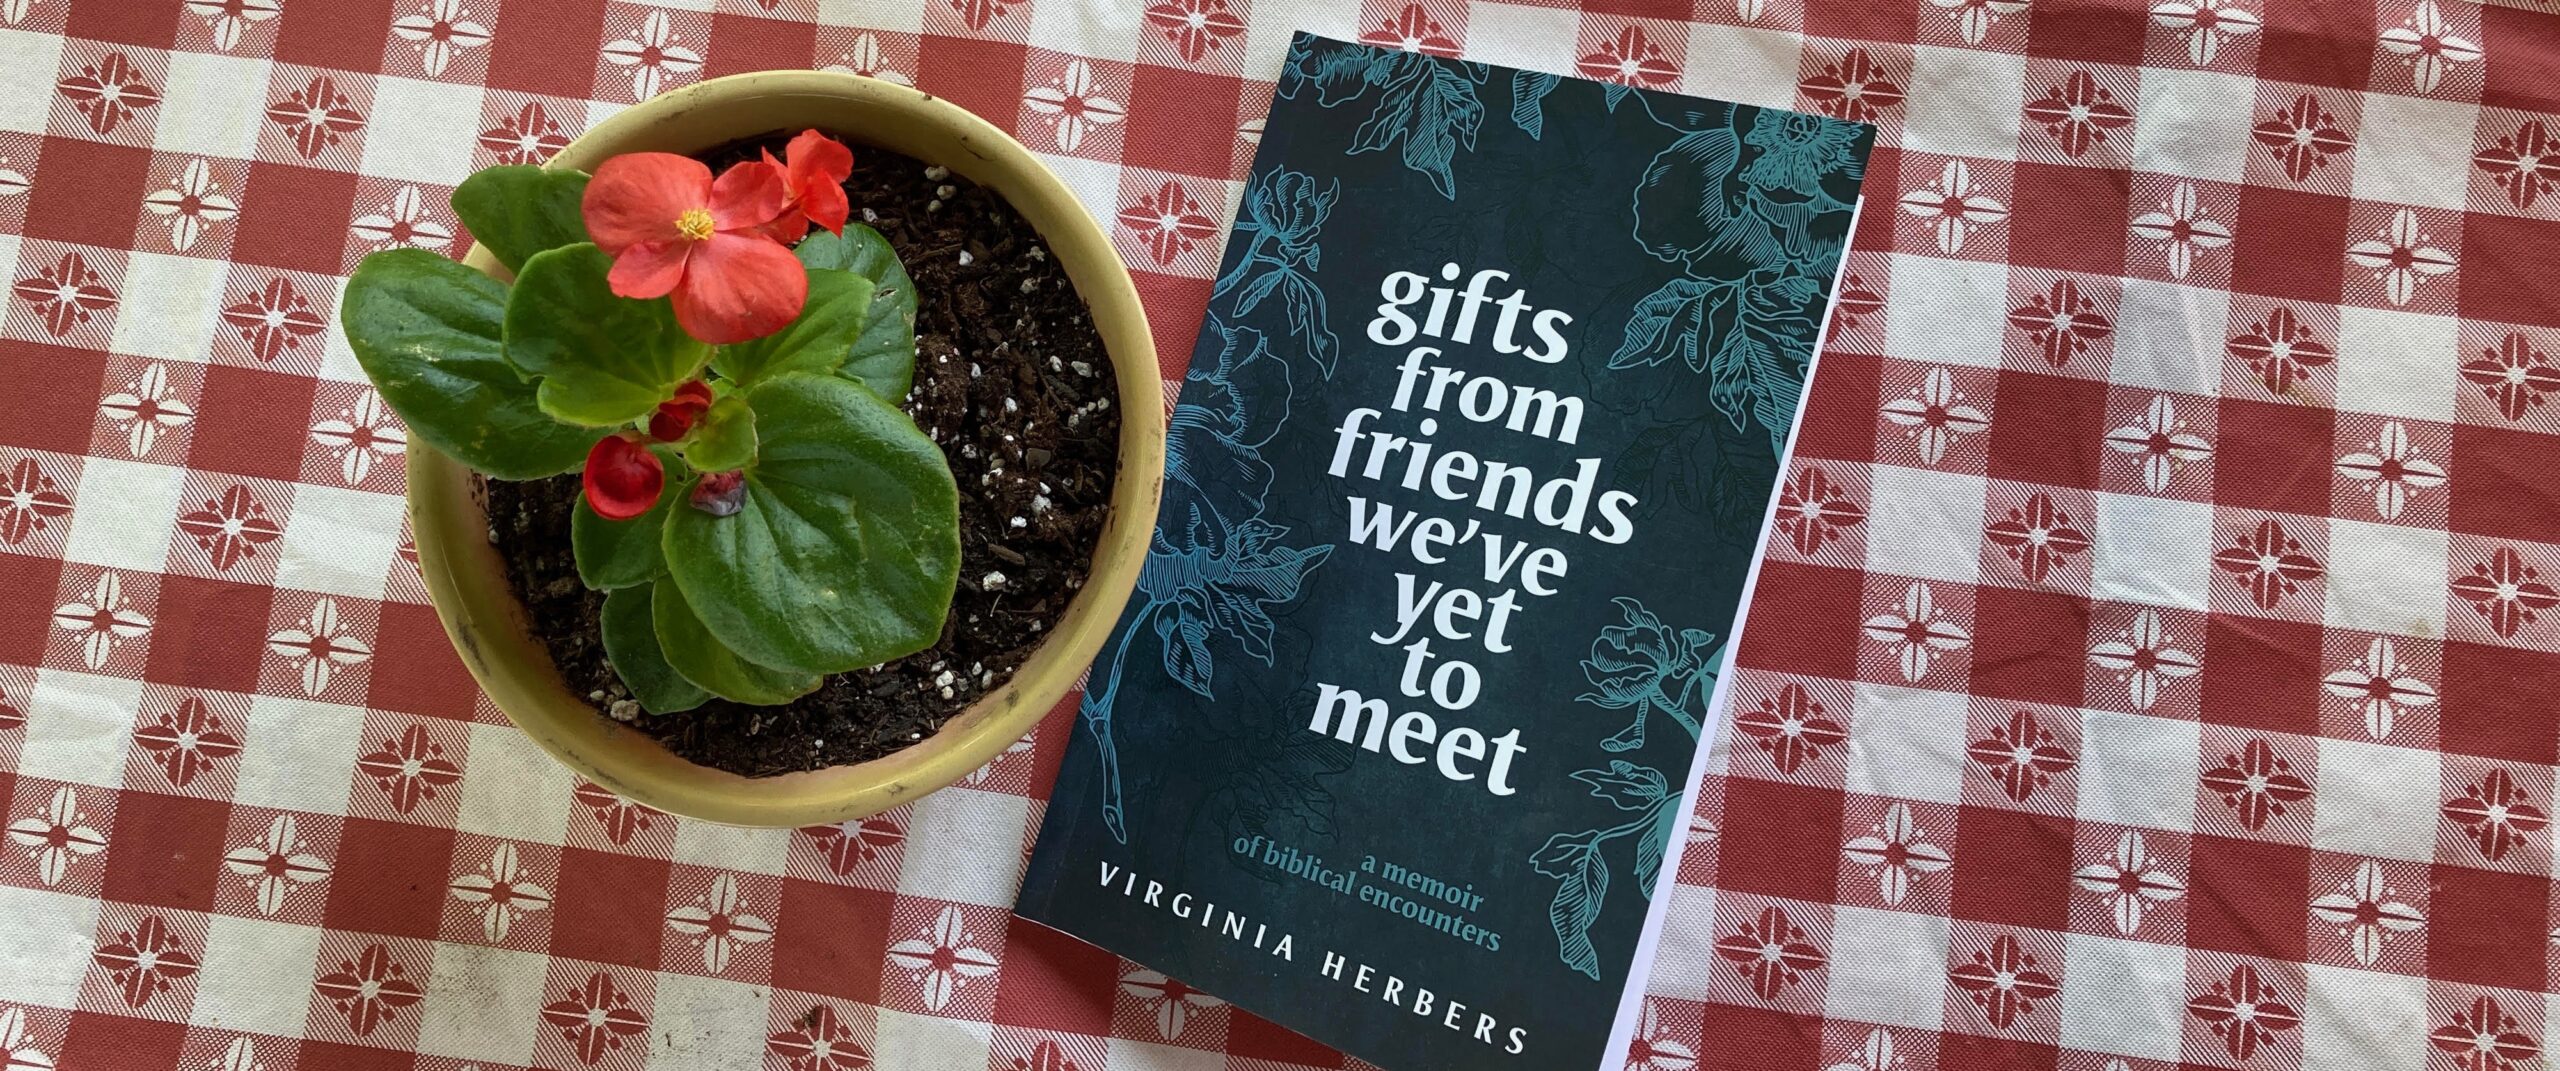 Book Review: “Gifts from Friends We’ve Yet to Meet” by Virginia Herbers 